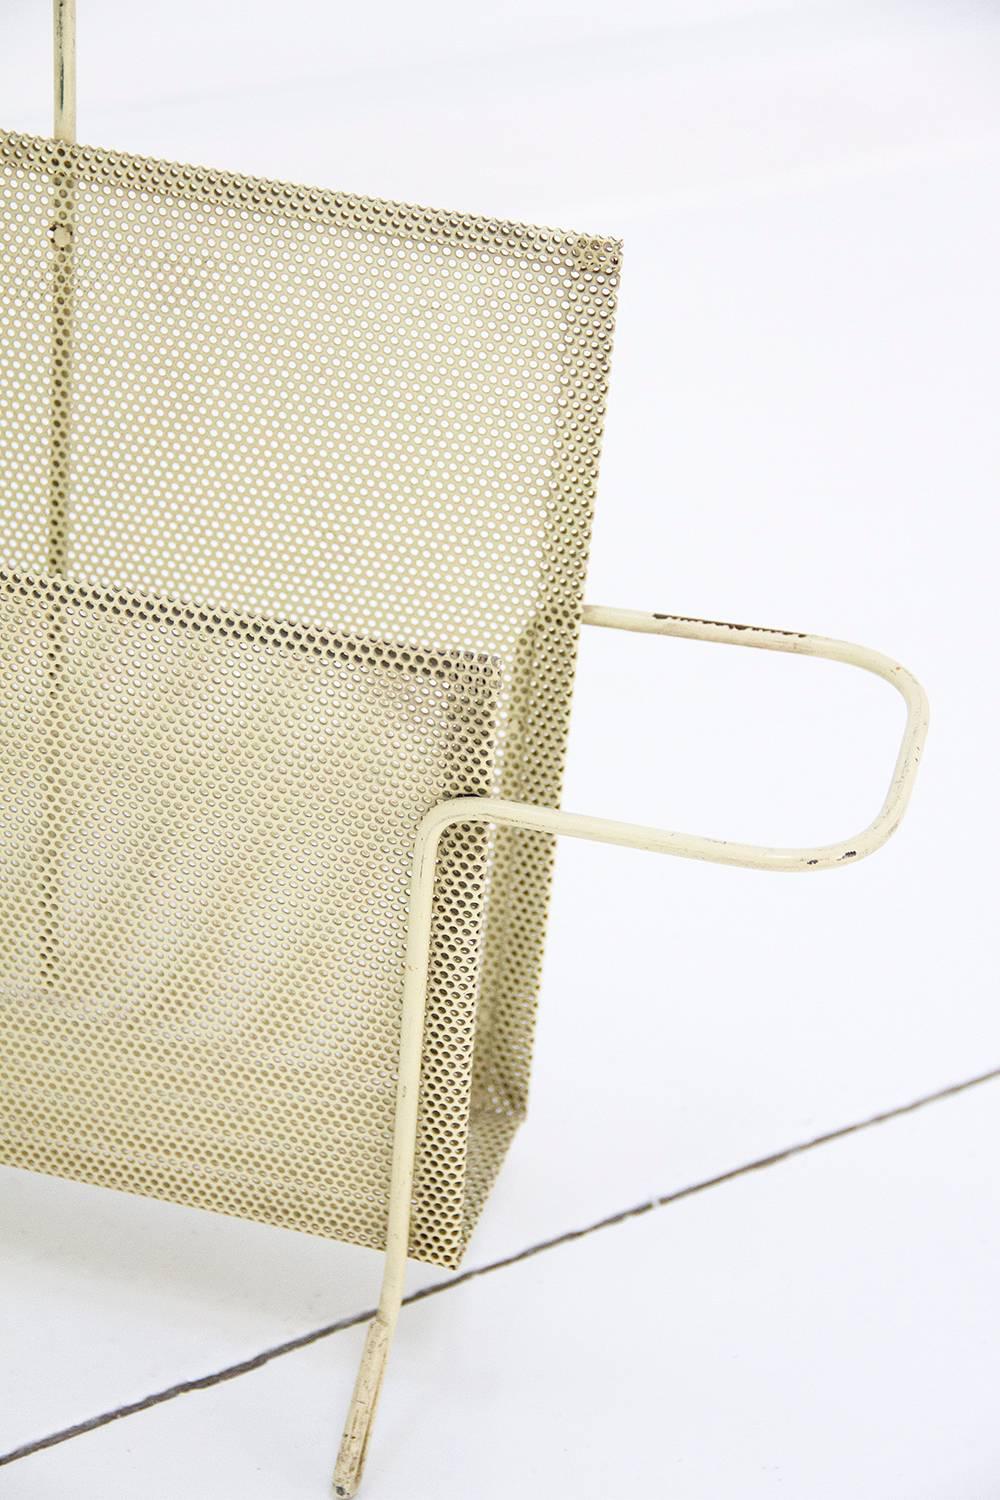 Mid-20th Century Magazine Holder Designed by Mathieu Mategot, Folded Metal, circa 1950, France For Sale